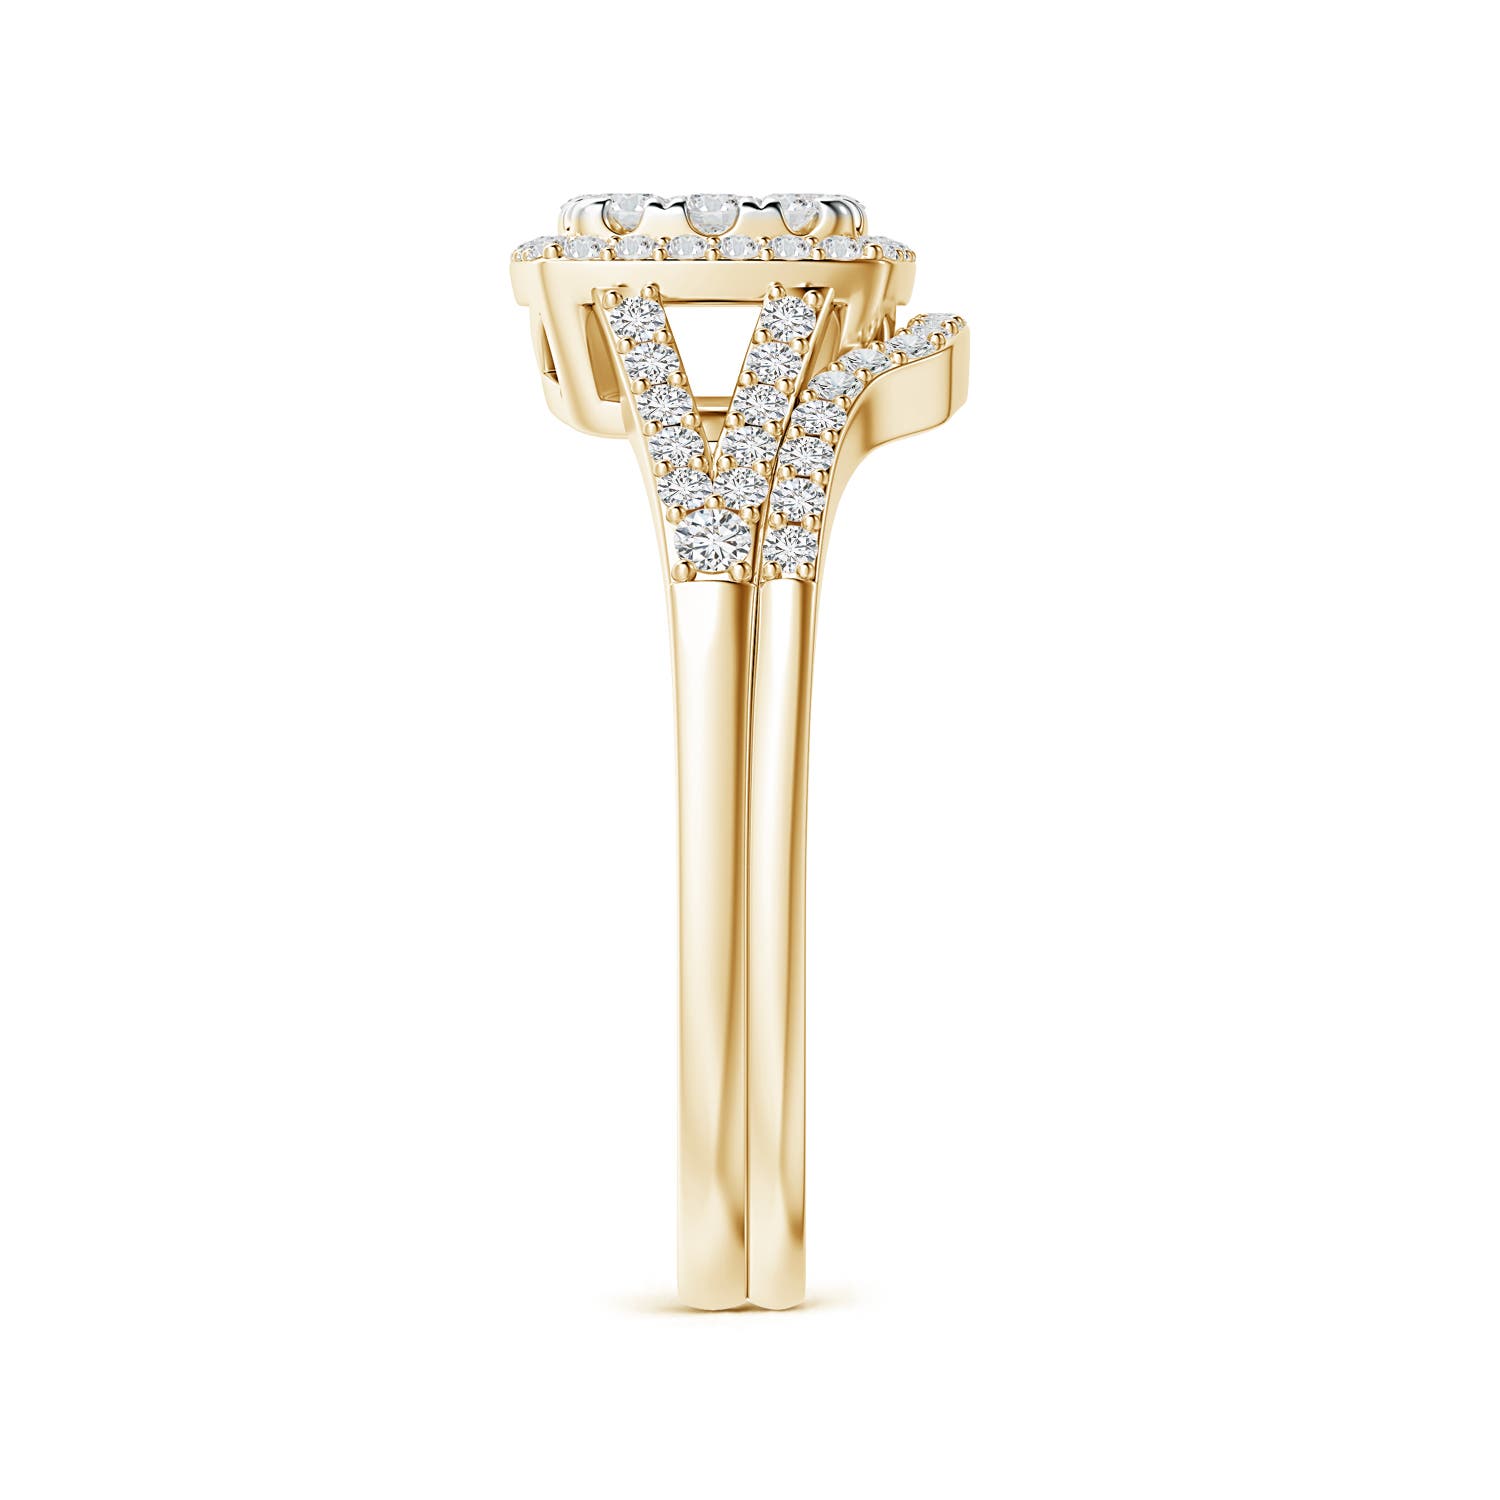 H, SI2 / 0.87 CT / 14 KT Yellow Gold